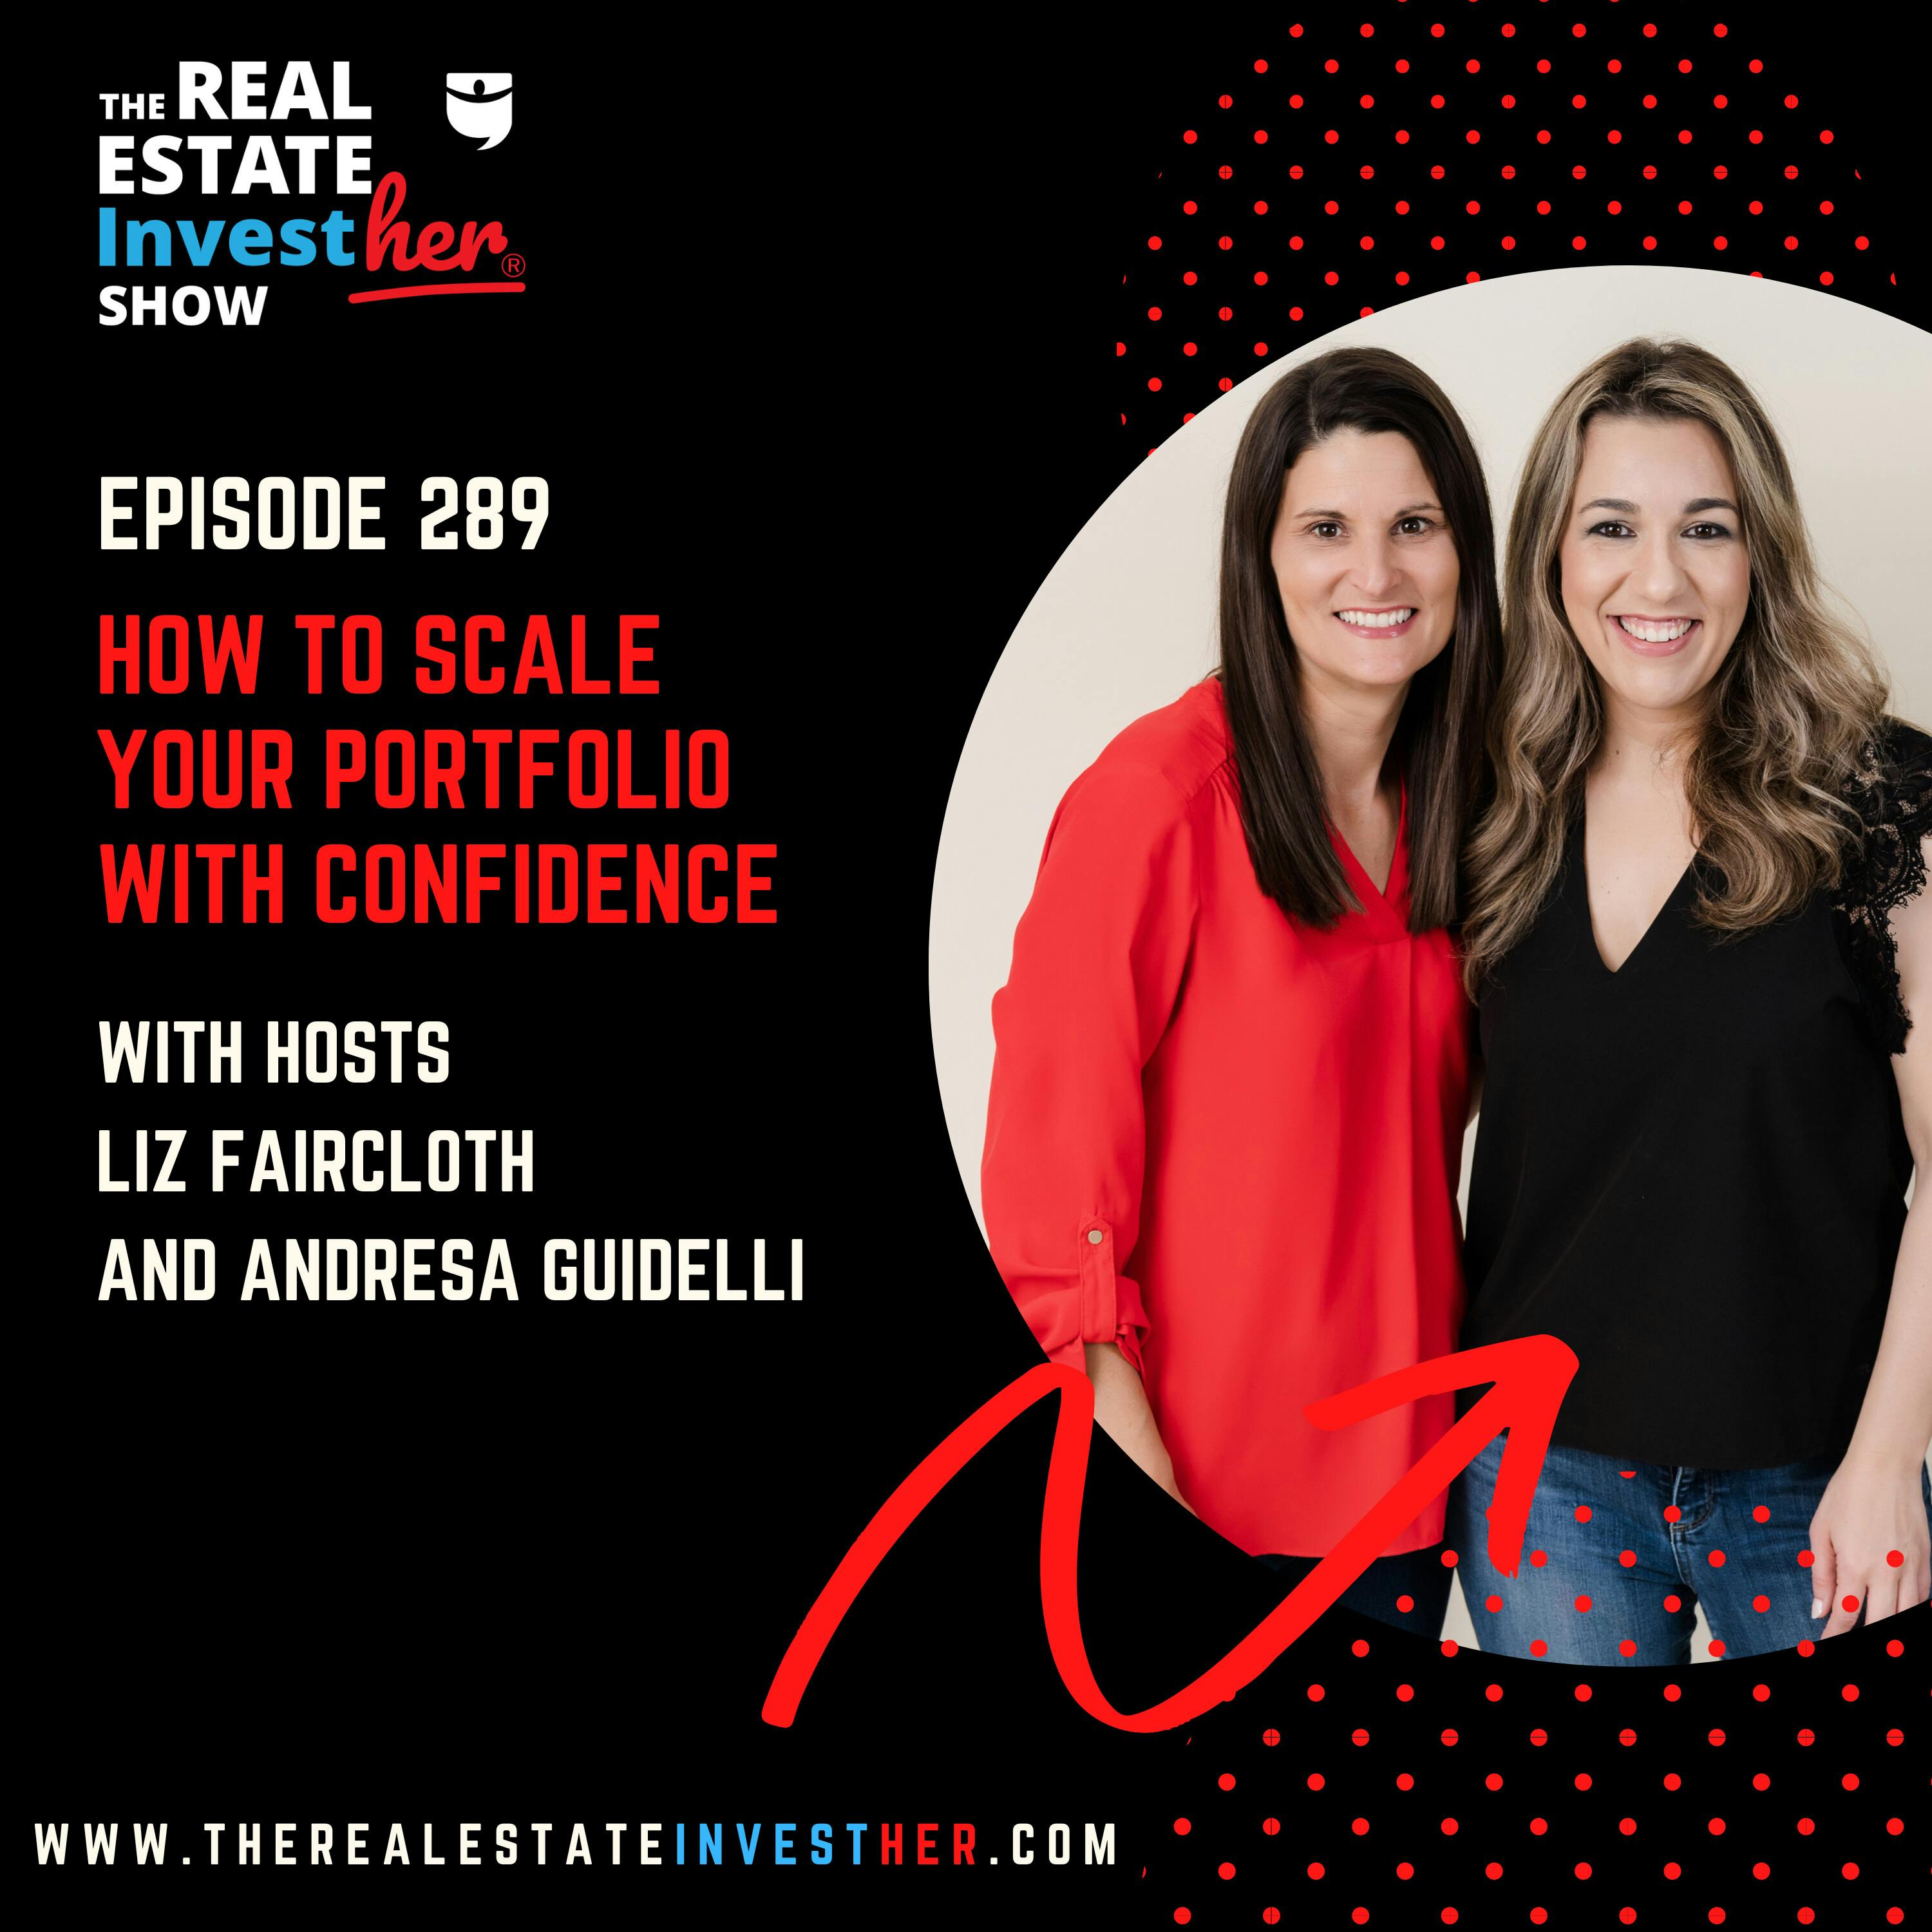 How to Scale Your Portfolio with Confidence (Minisode)